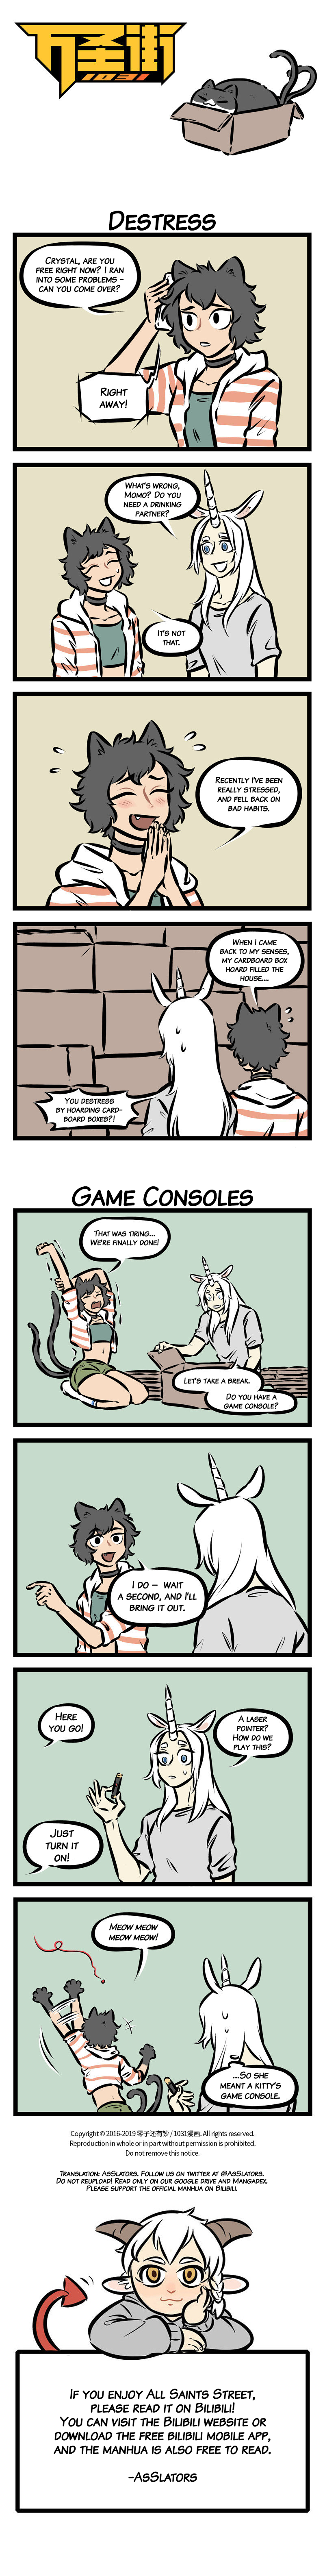 All Saints Street Chapter 311: Some Game Consoles Are Not Meant For Everyone. - Picture 1